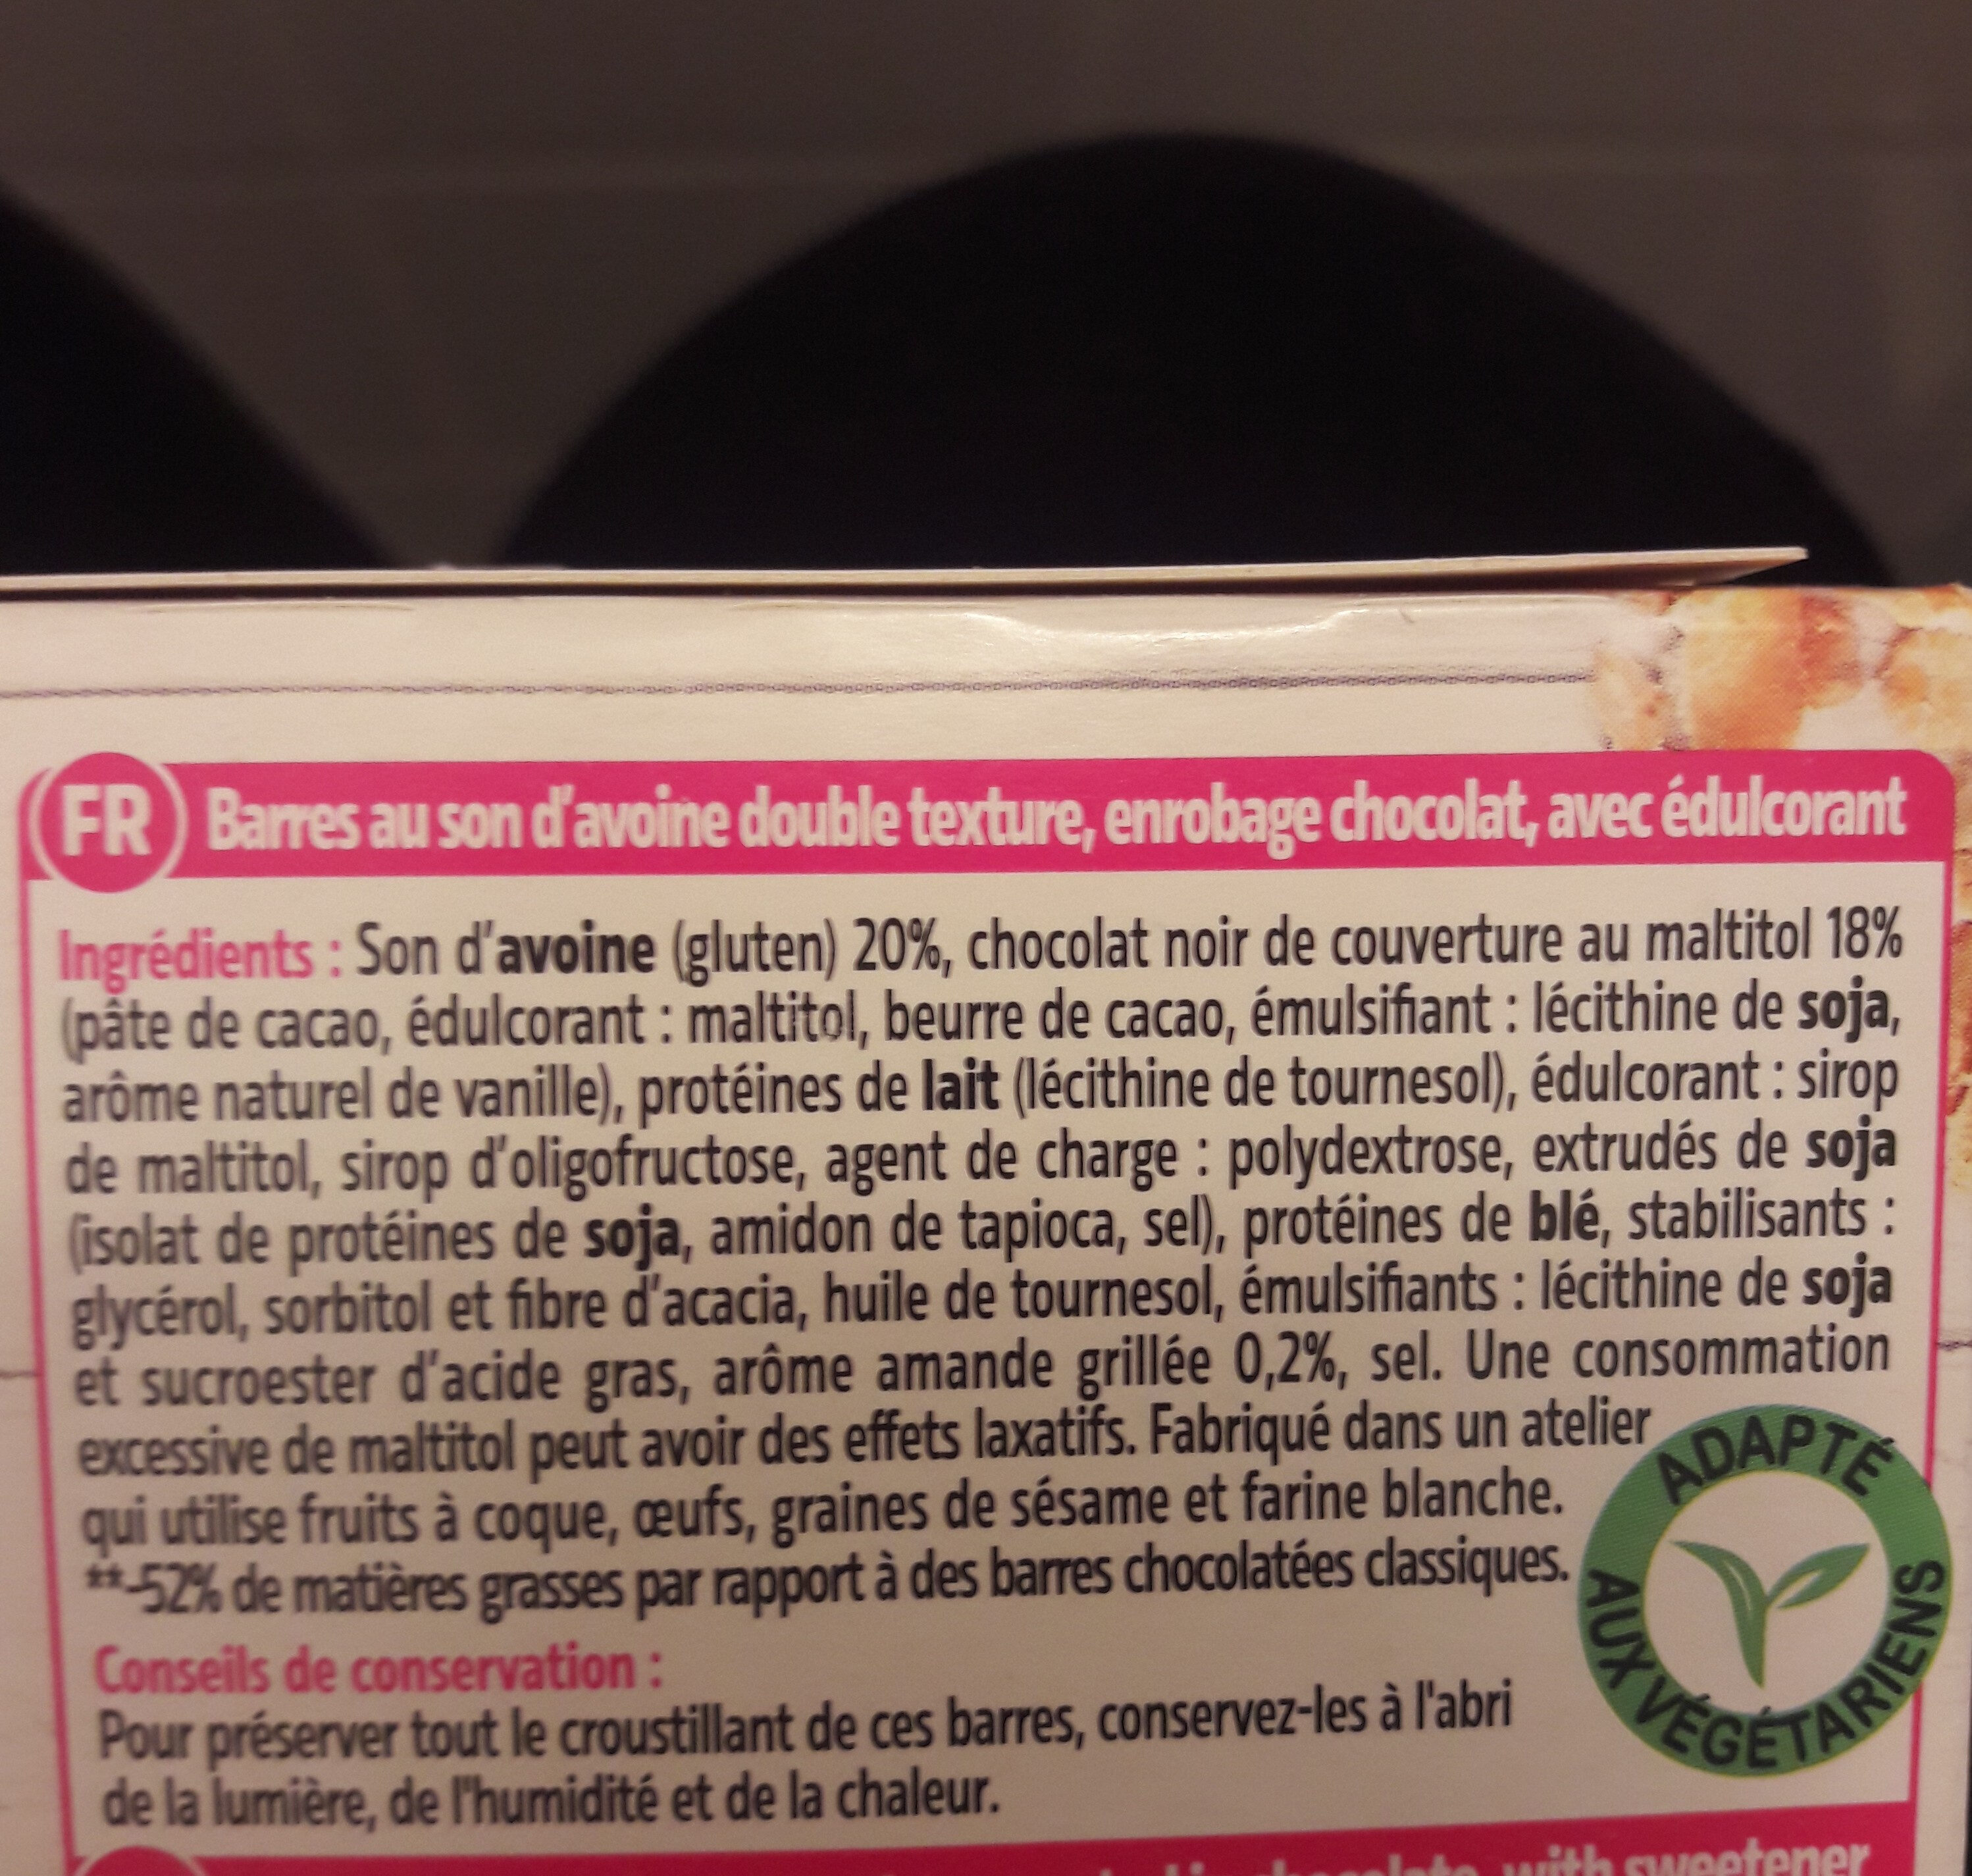 Dukan barres extra-gourmandes - Ingredients - fr